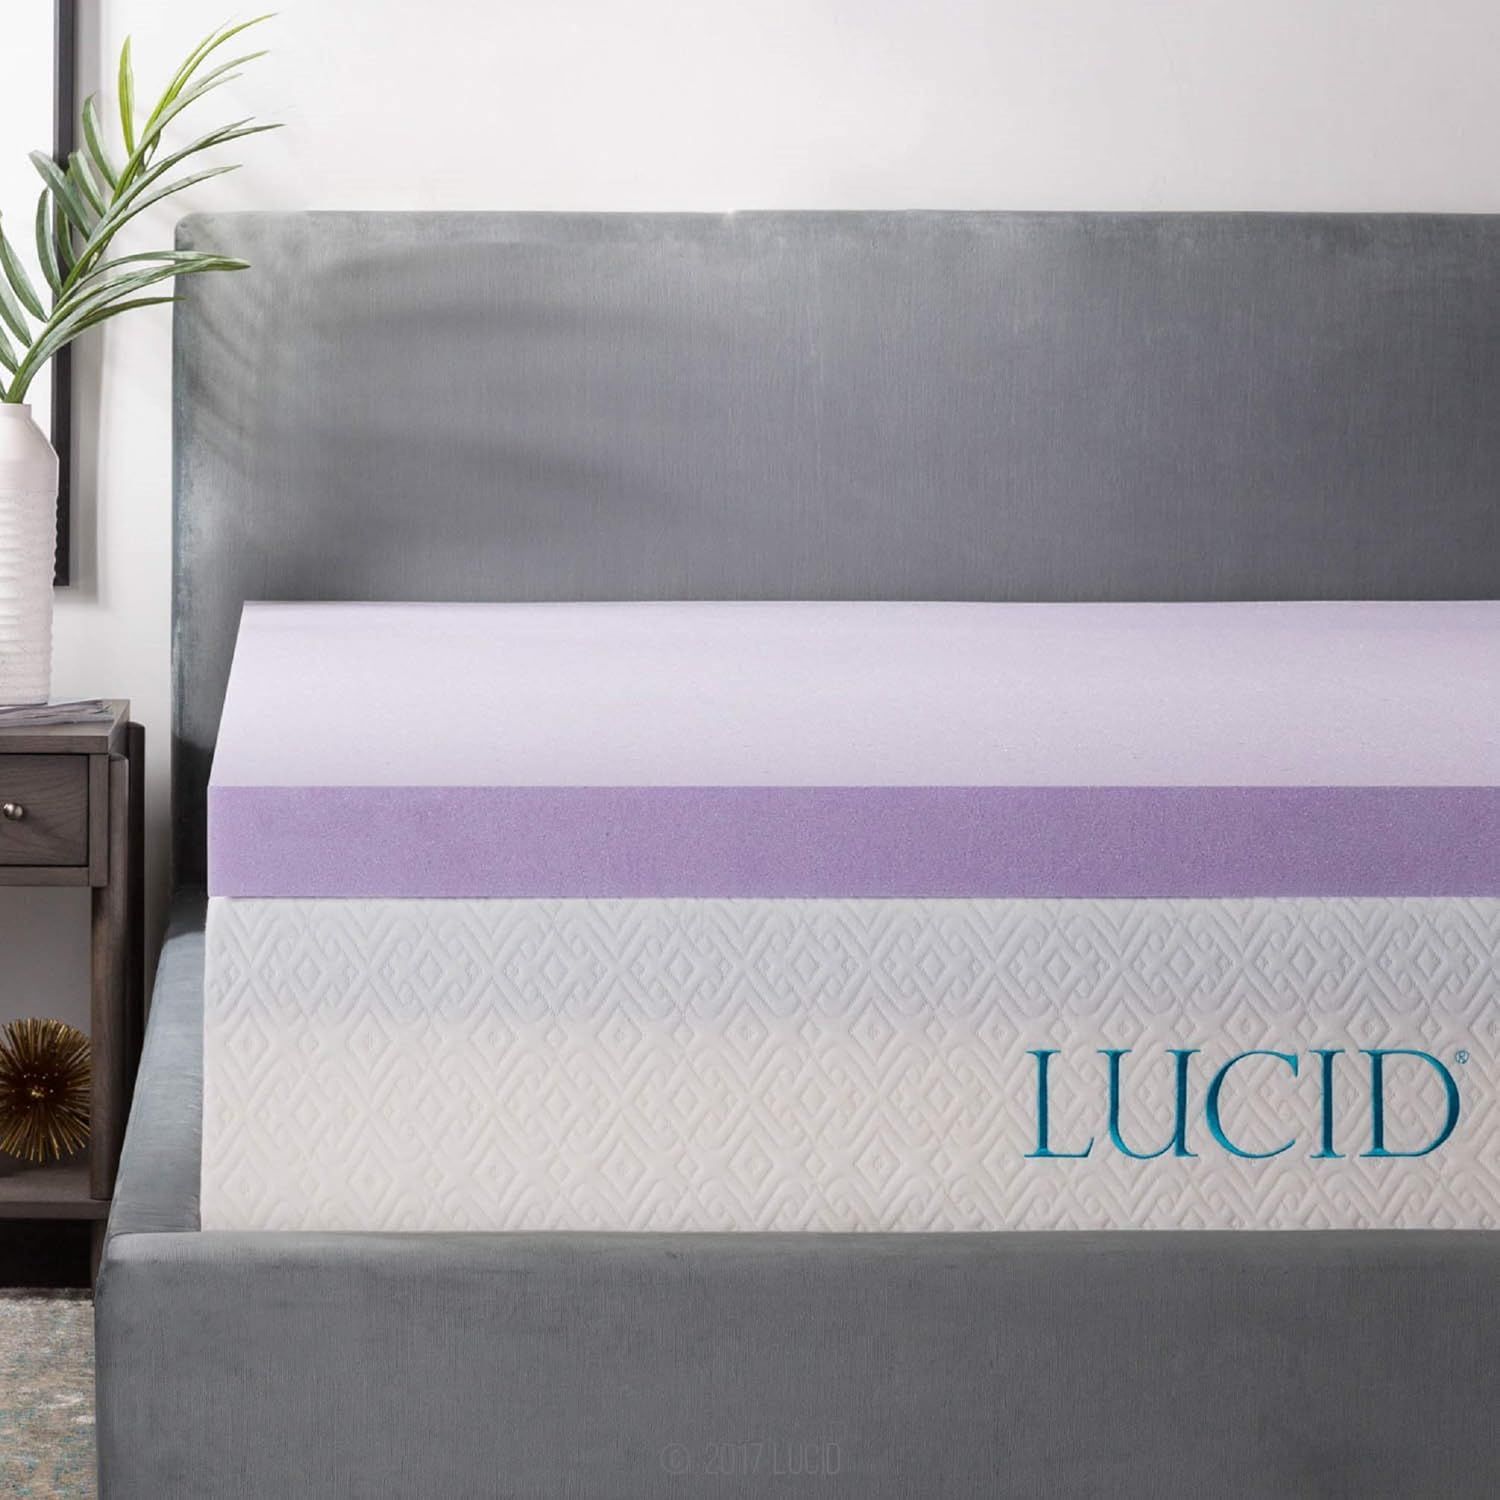 LUCID 3 Inch Lavender Infused Memory Foam Mattress Topper - Ventilated Design - Full Size | Amazon (US)